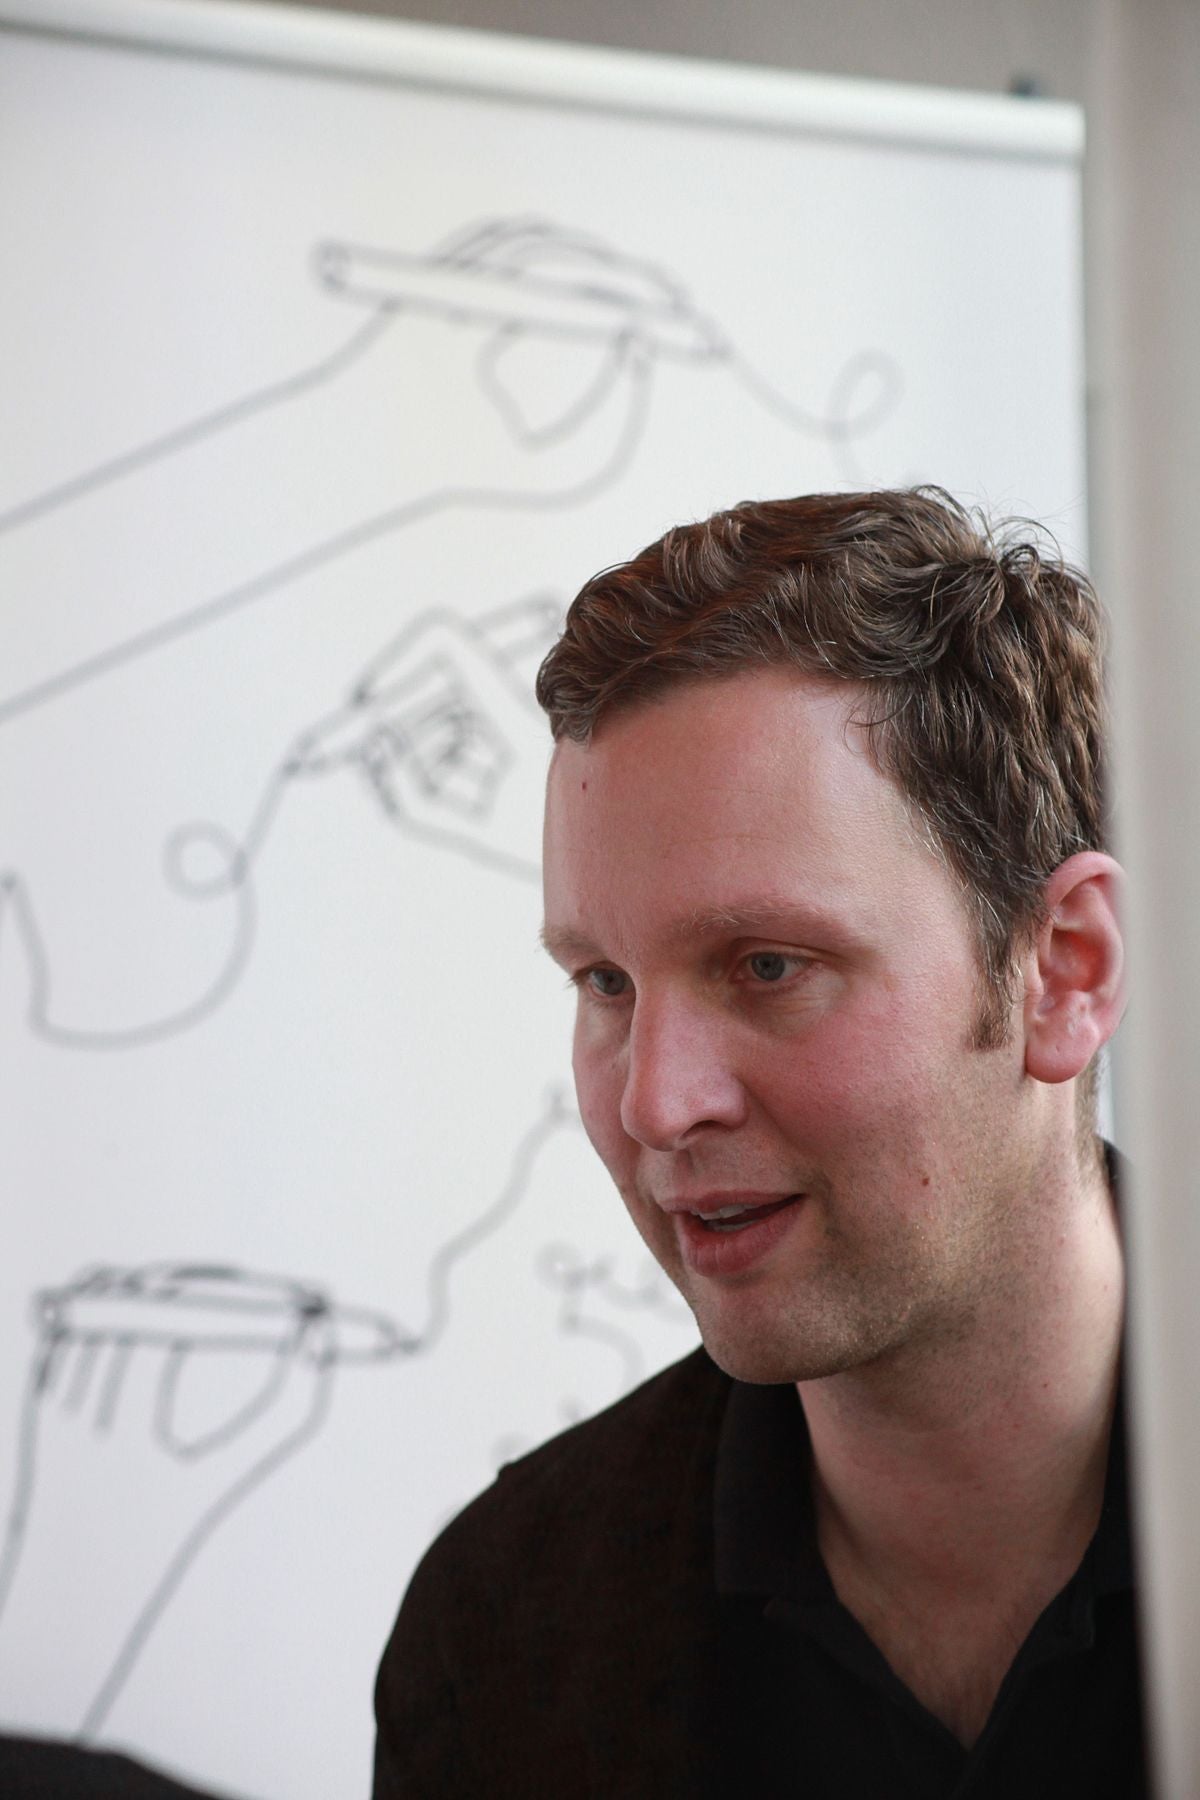 THINGS YOU SHOULD KNOW ABOUT DAVID SHRIGLEY